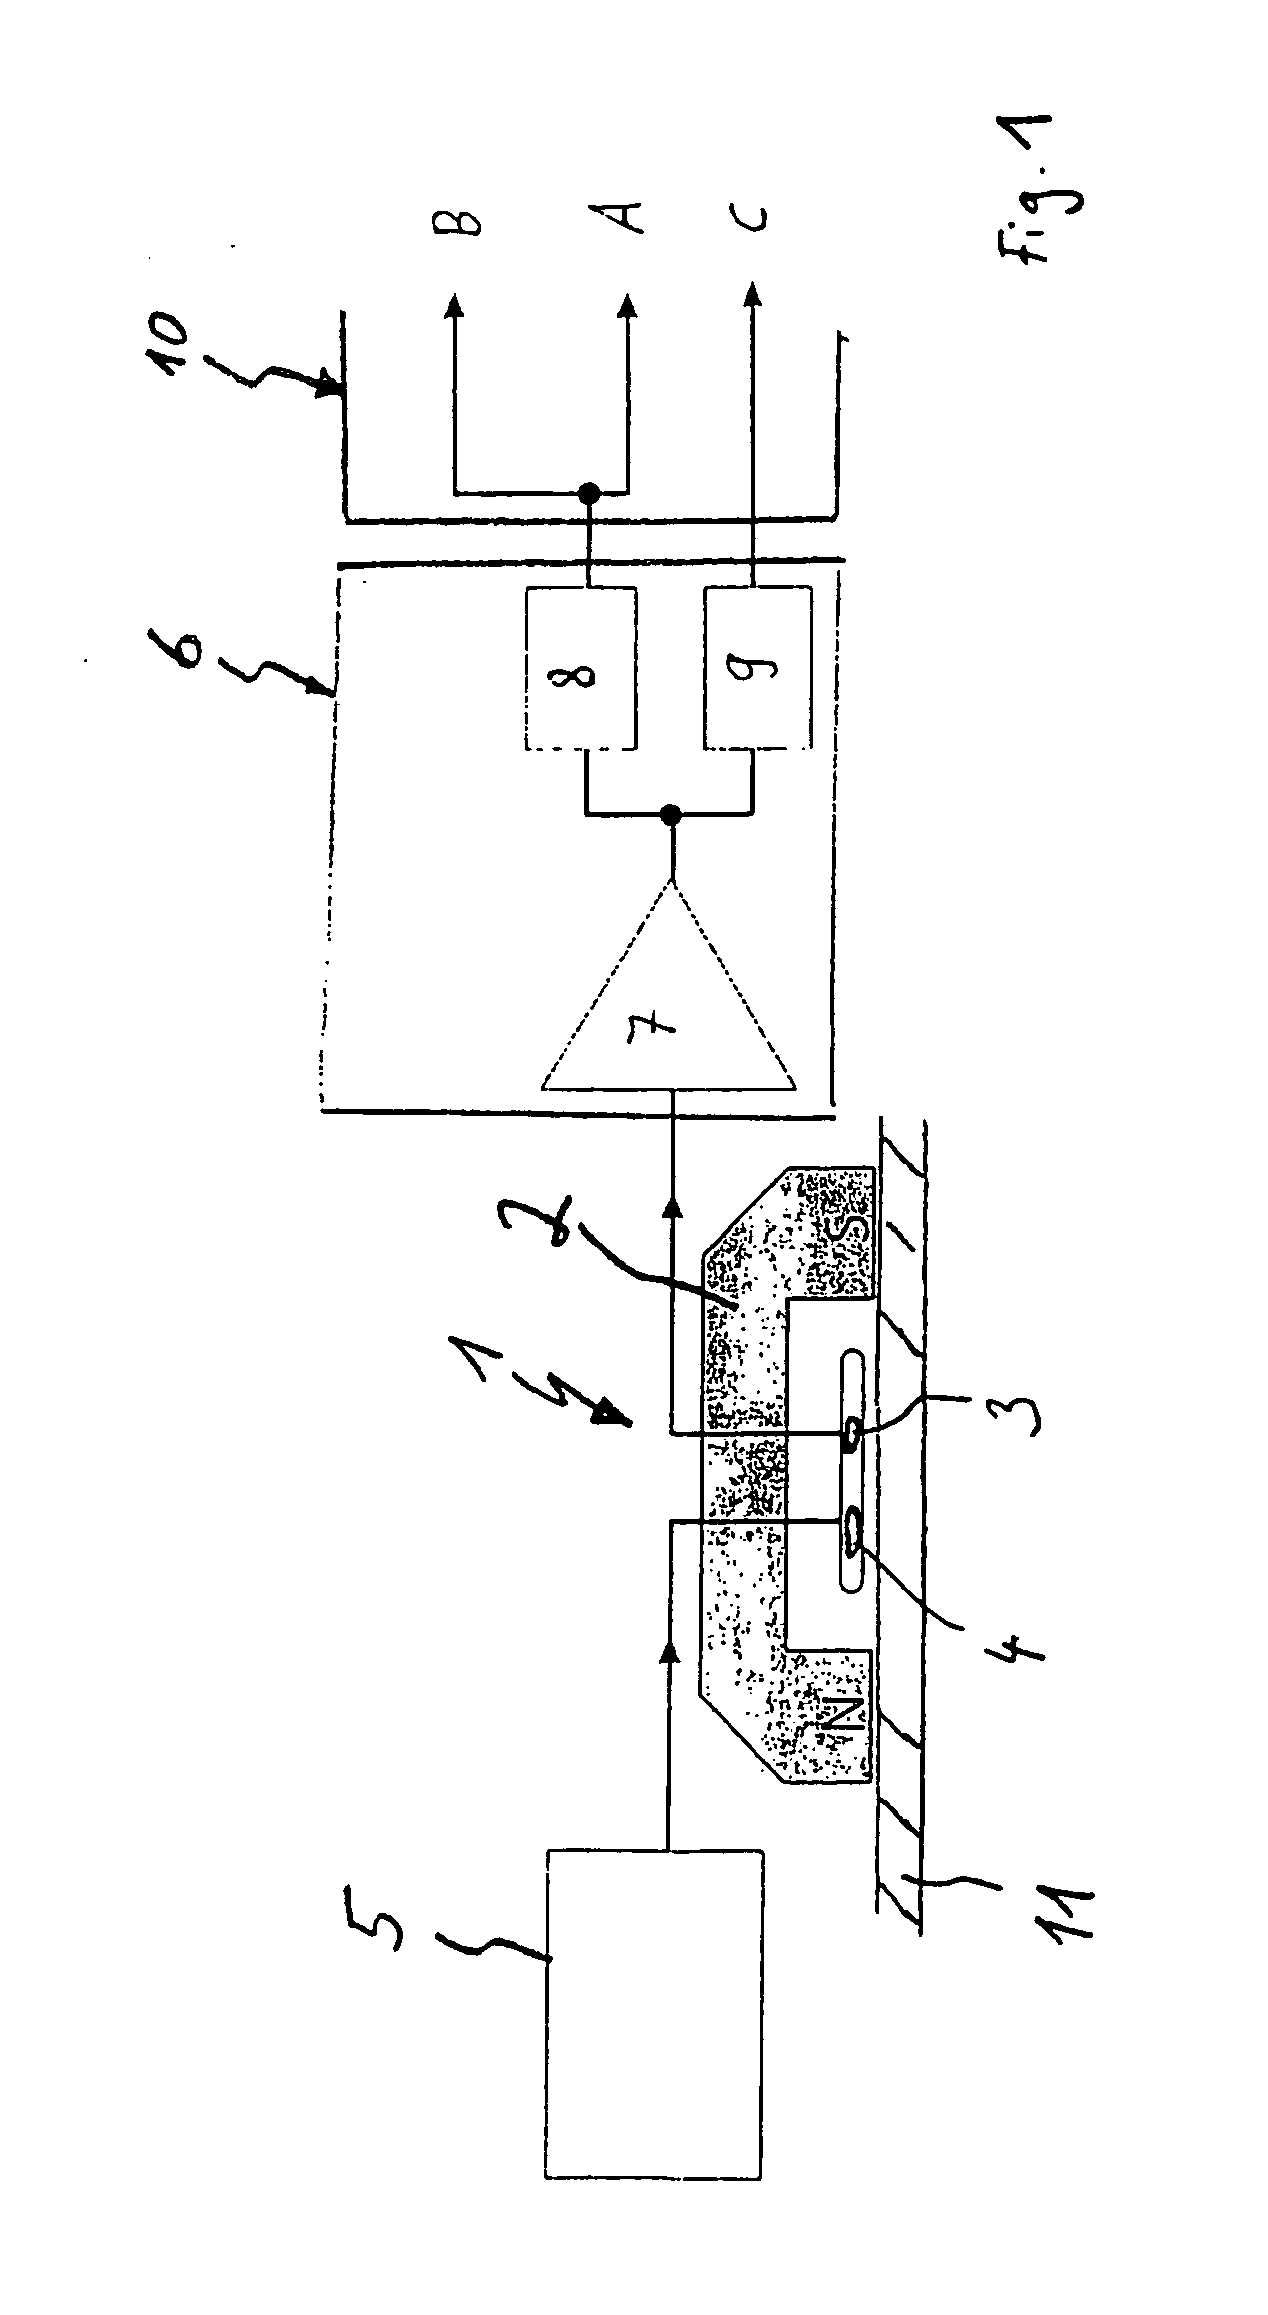 Method and System for Non-destructively Testing a Metallic Workpiece